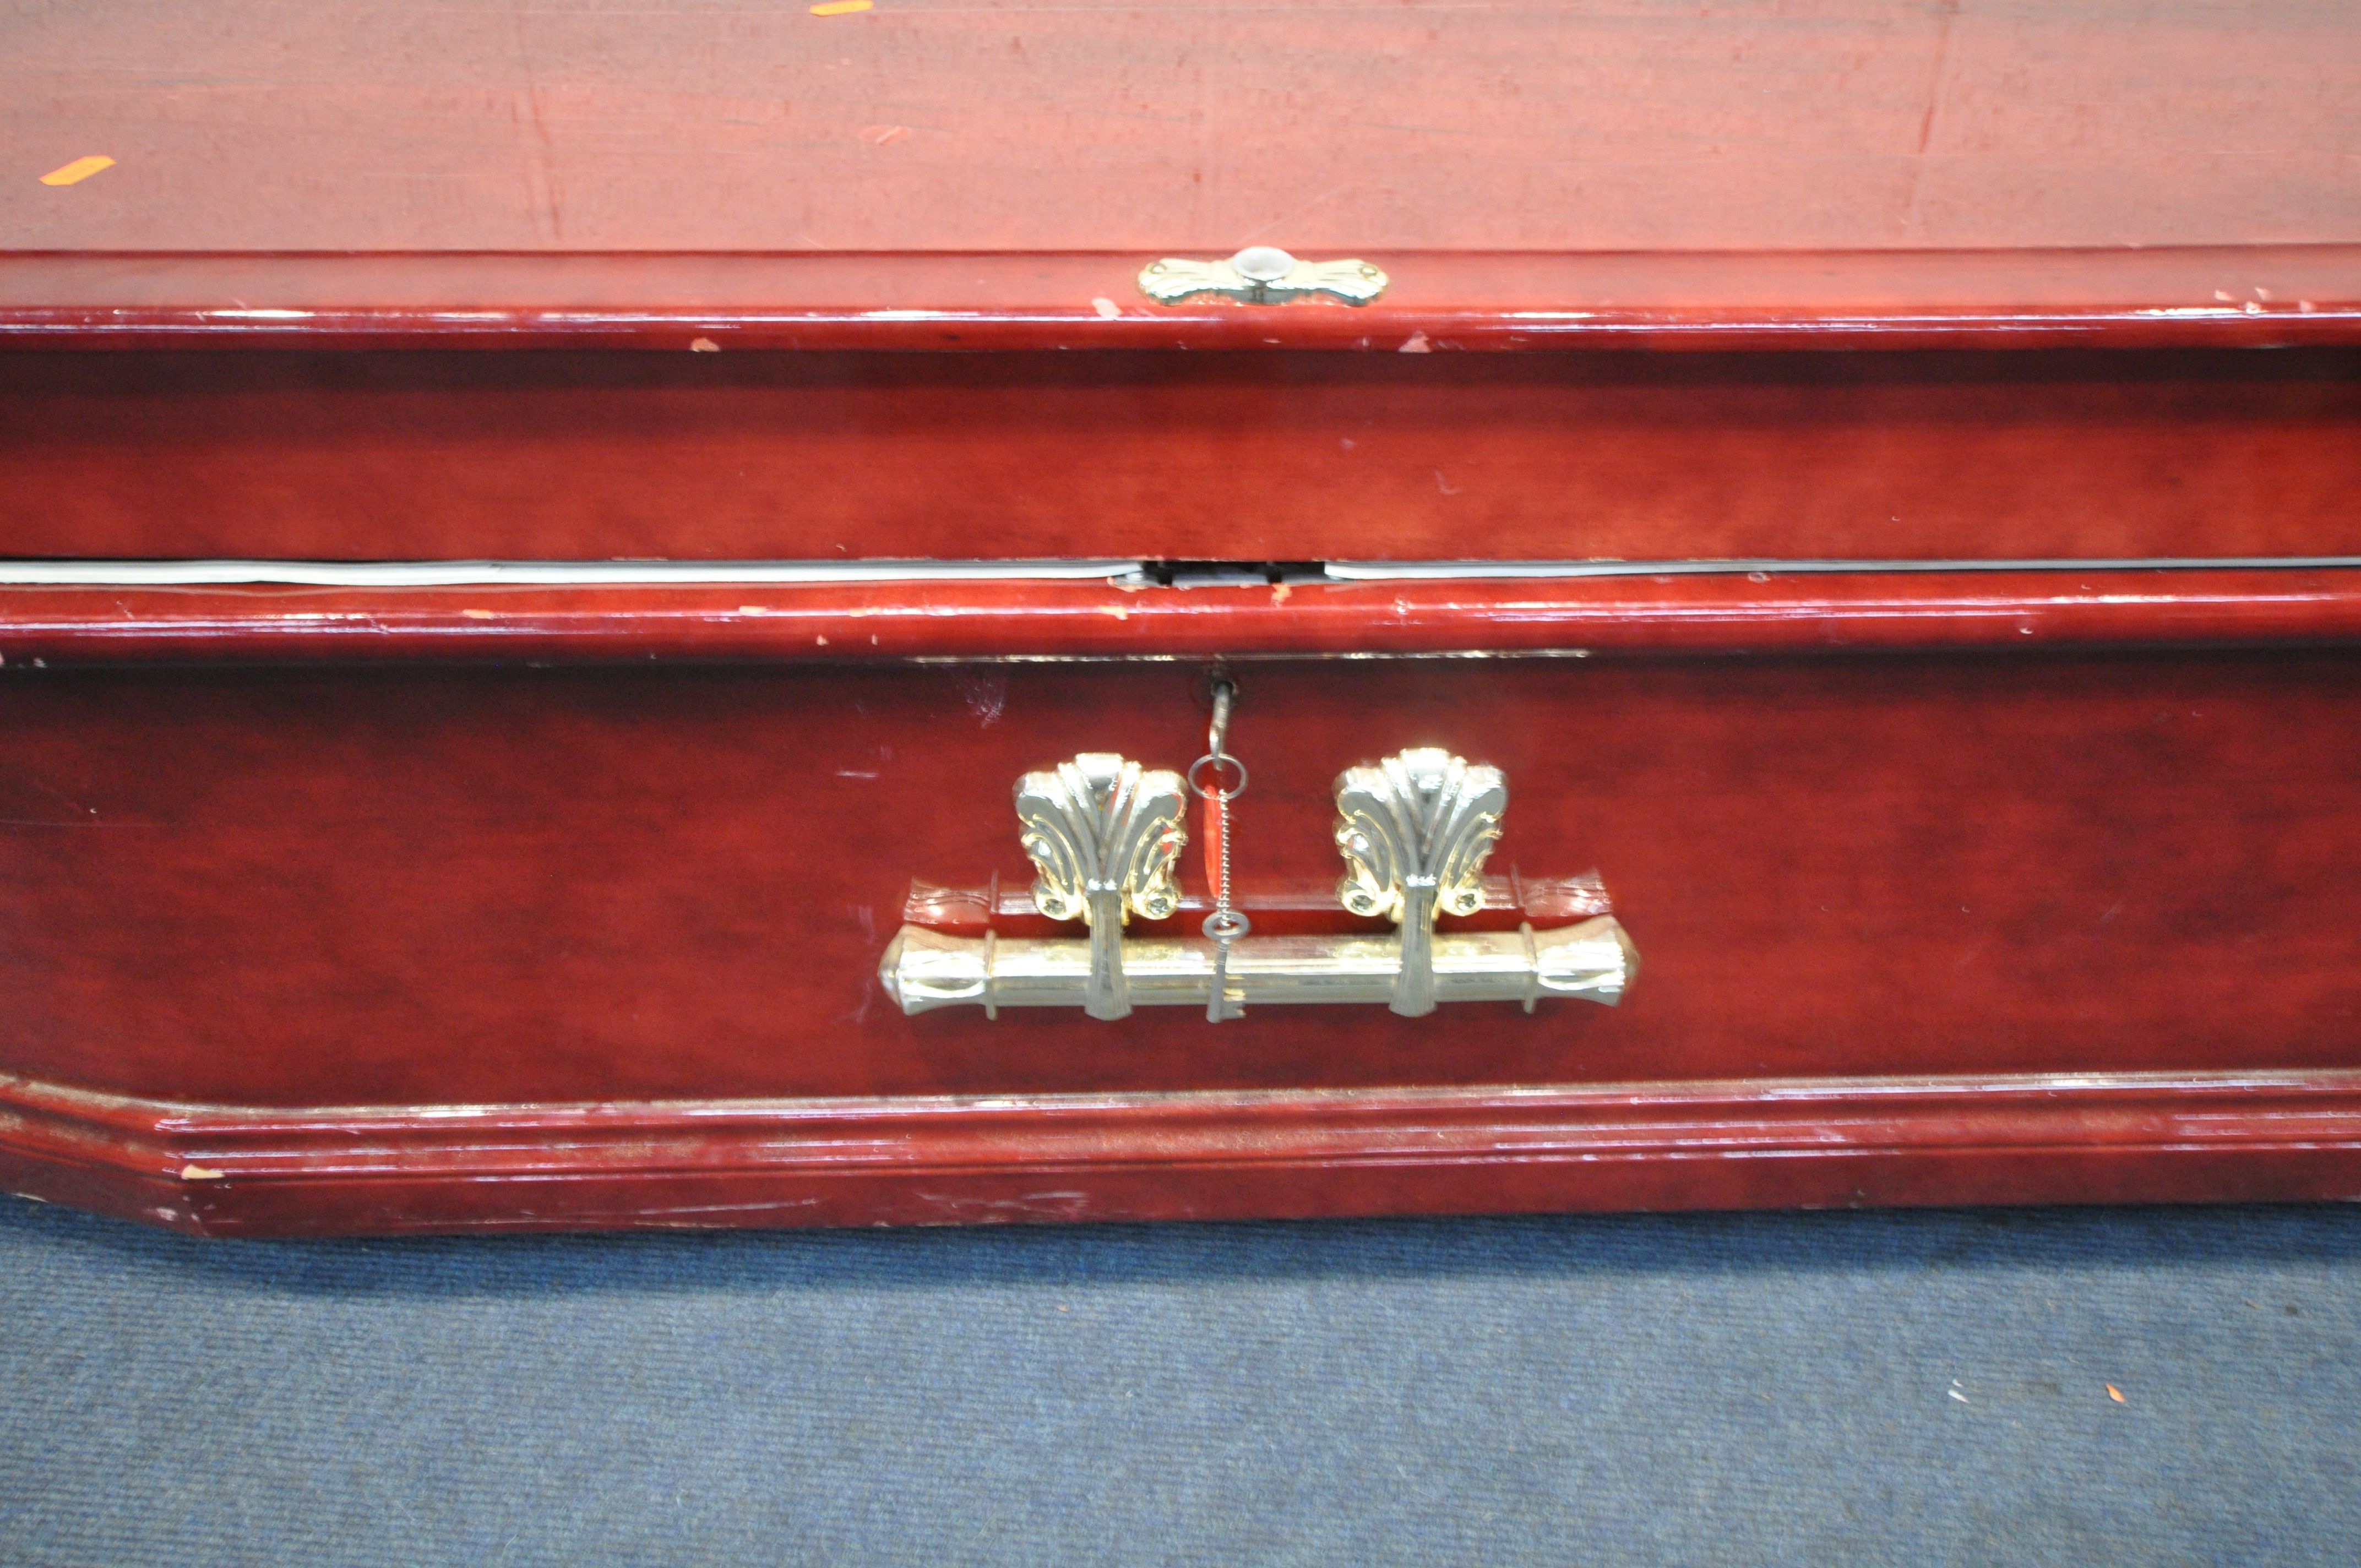 A BESPOKE COFFIN, with a glossy red finish, plastic finials and handles, length 211cm x depth 62cm x - Image 6 of 6